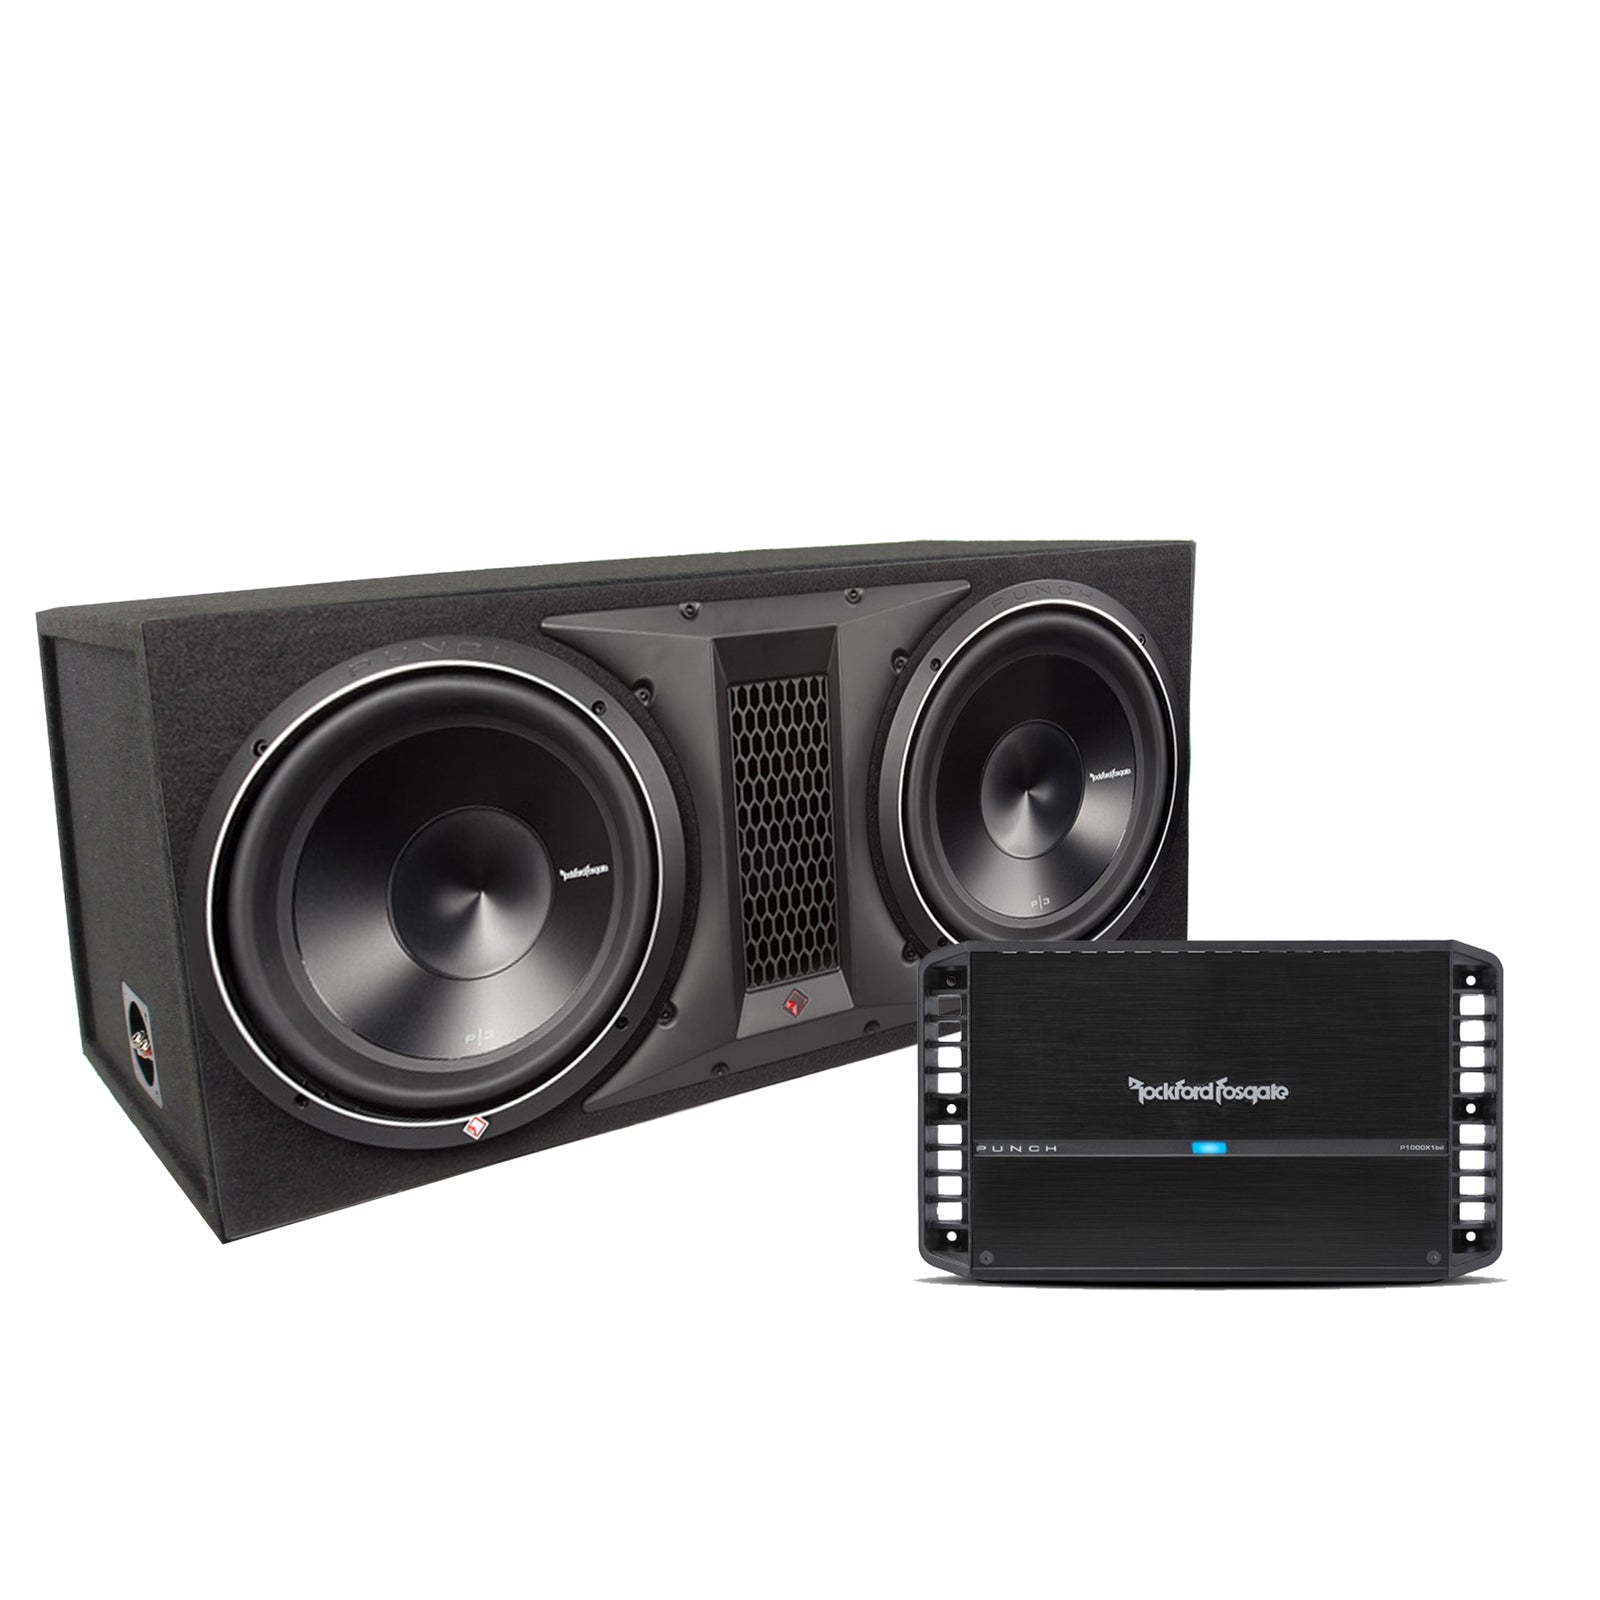 Rockford Fosgate R1200-1D + P32X12 Dual 12" Punch P3 Series Loaded  PACKAGE